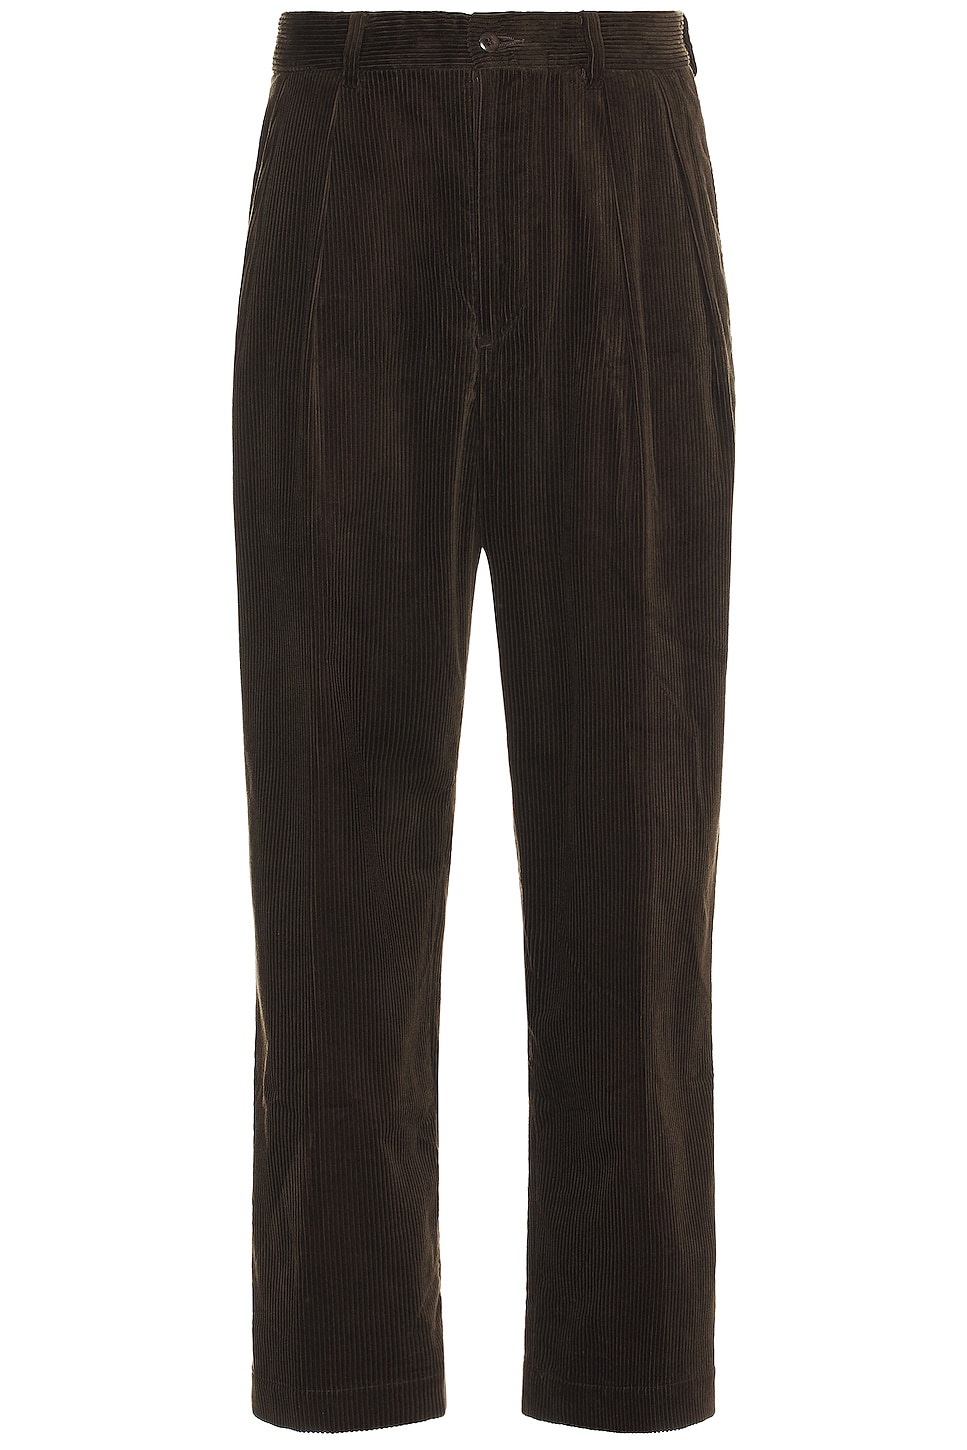 Image 1 of WACKO MARIA Double Pleated Corduroy Trousers in Brown